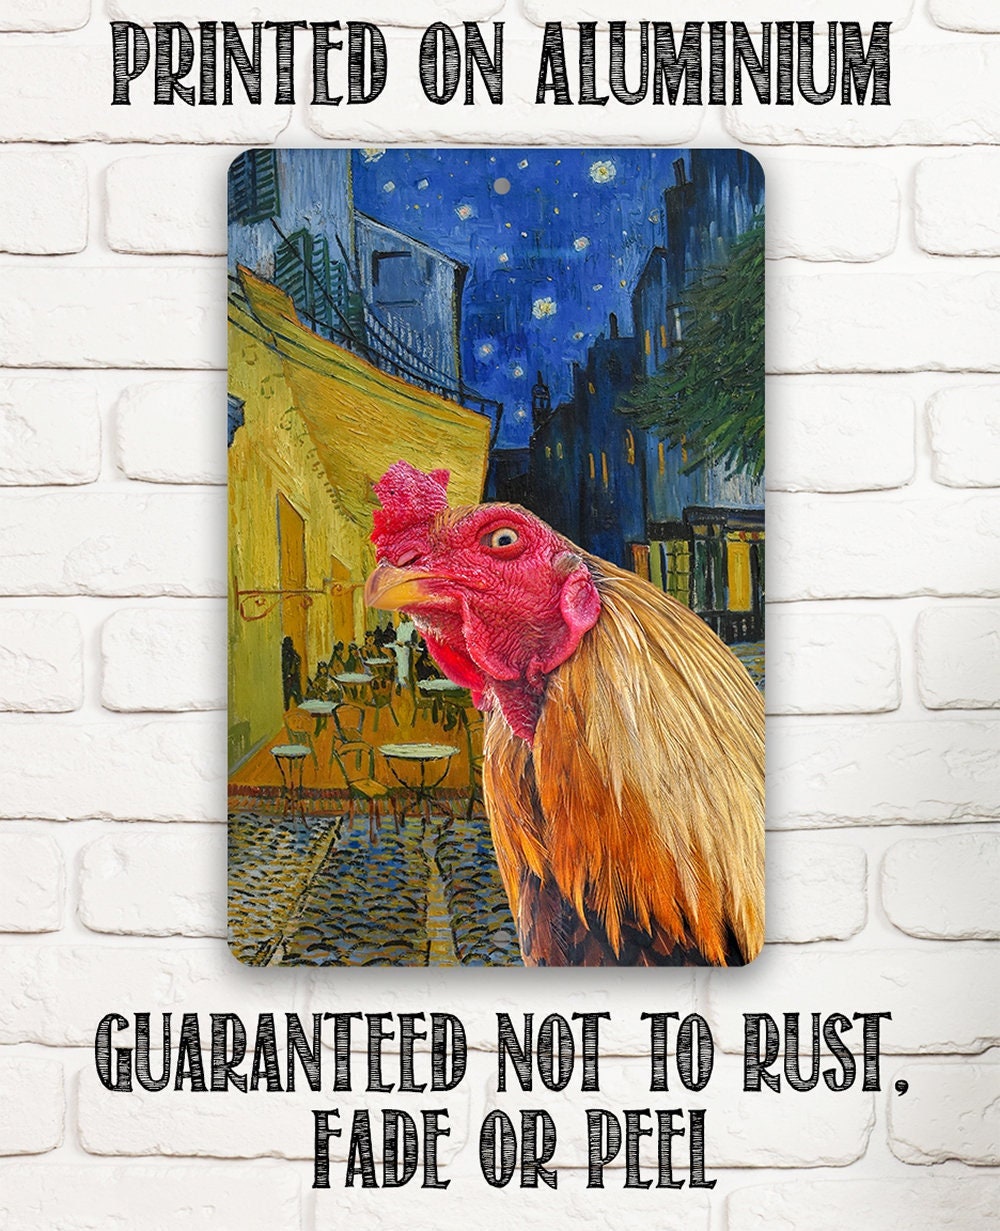 Café Terrace at Night Painting - Interrupted by Rooster - Metal Sign Metal Sign Lone Star Art 